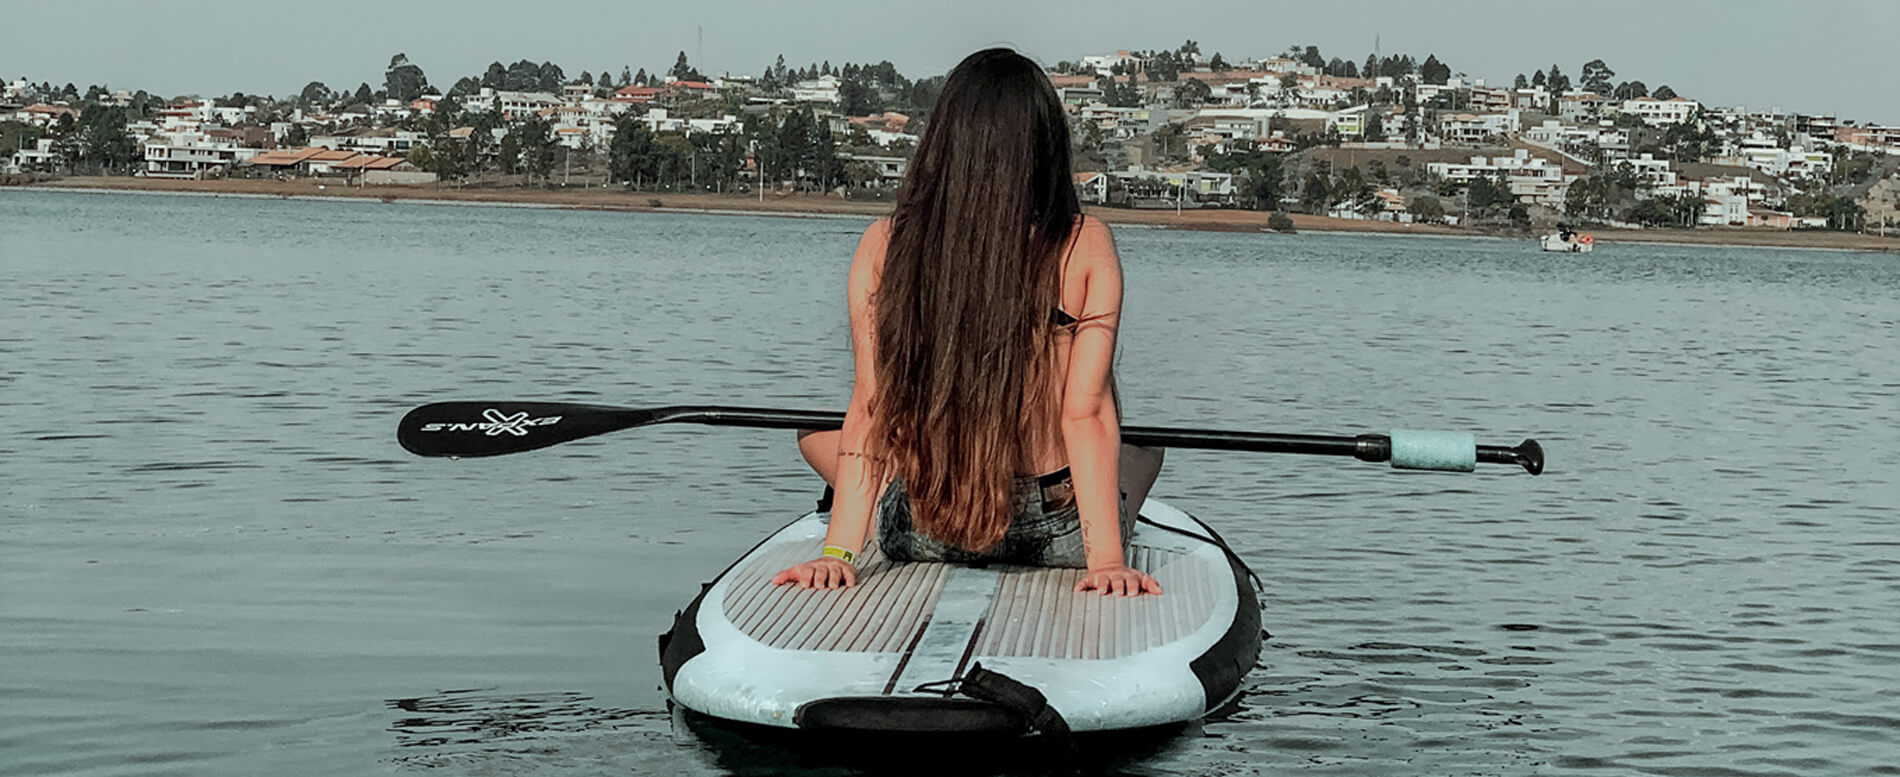 Woman paddle boarding using a soft top paddle board